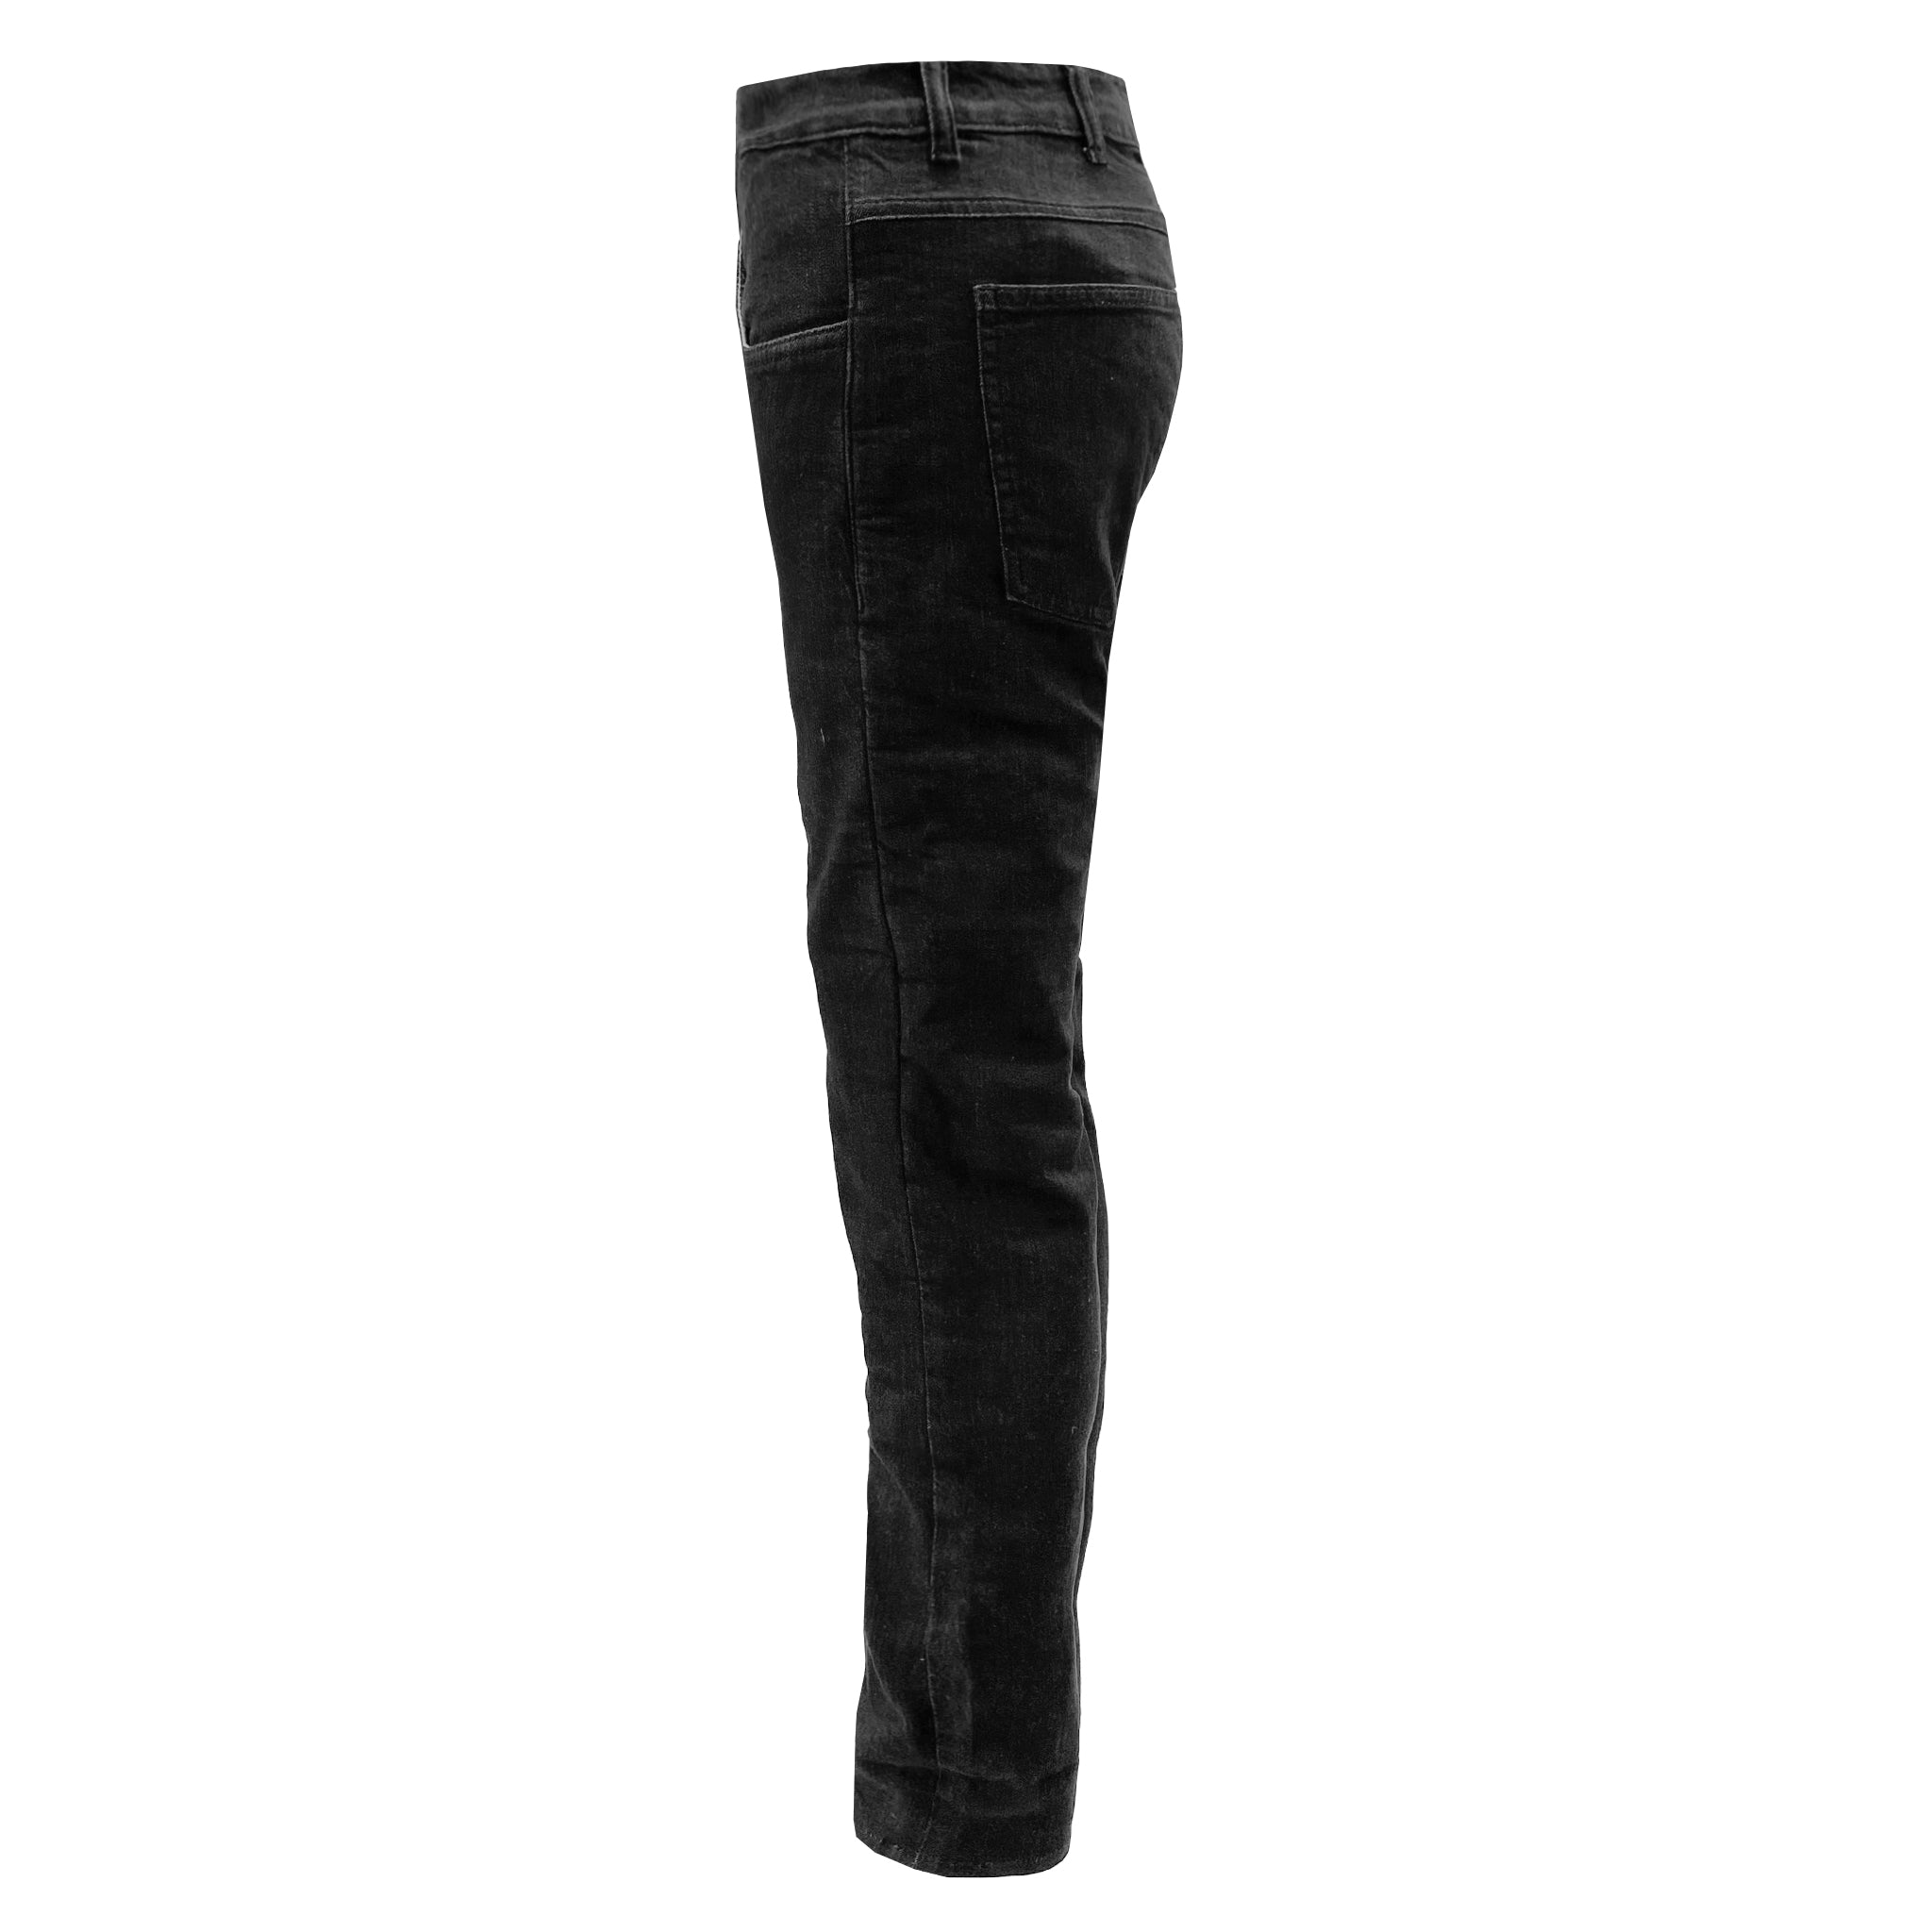 Straight Leg Protective Jeans for Women - Black with Pads